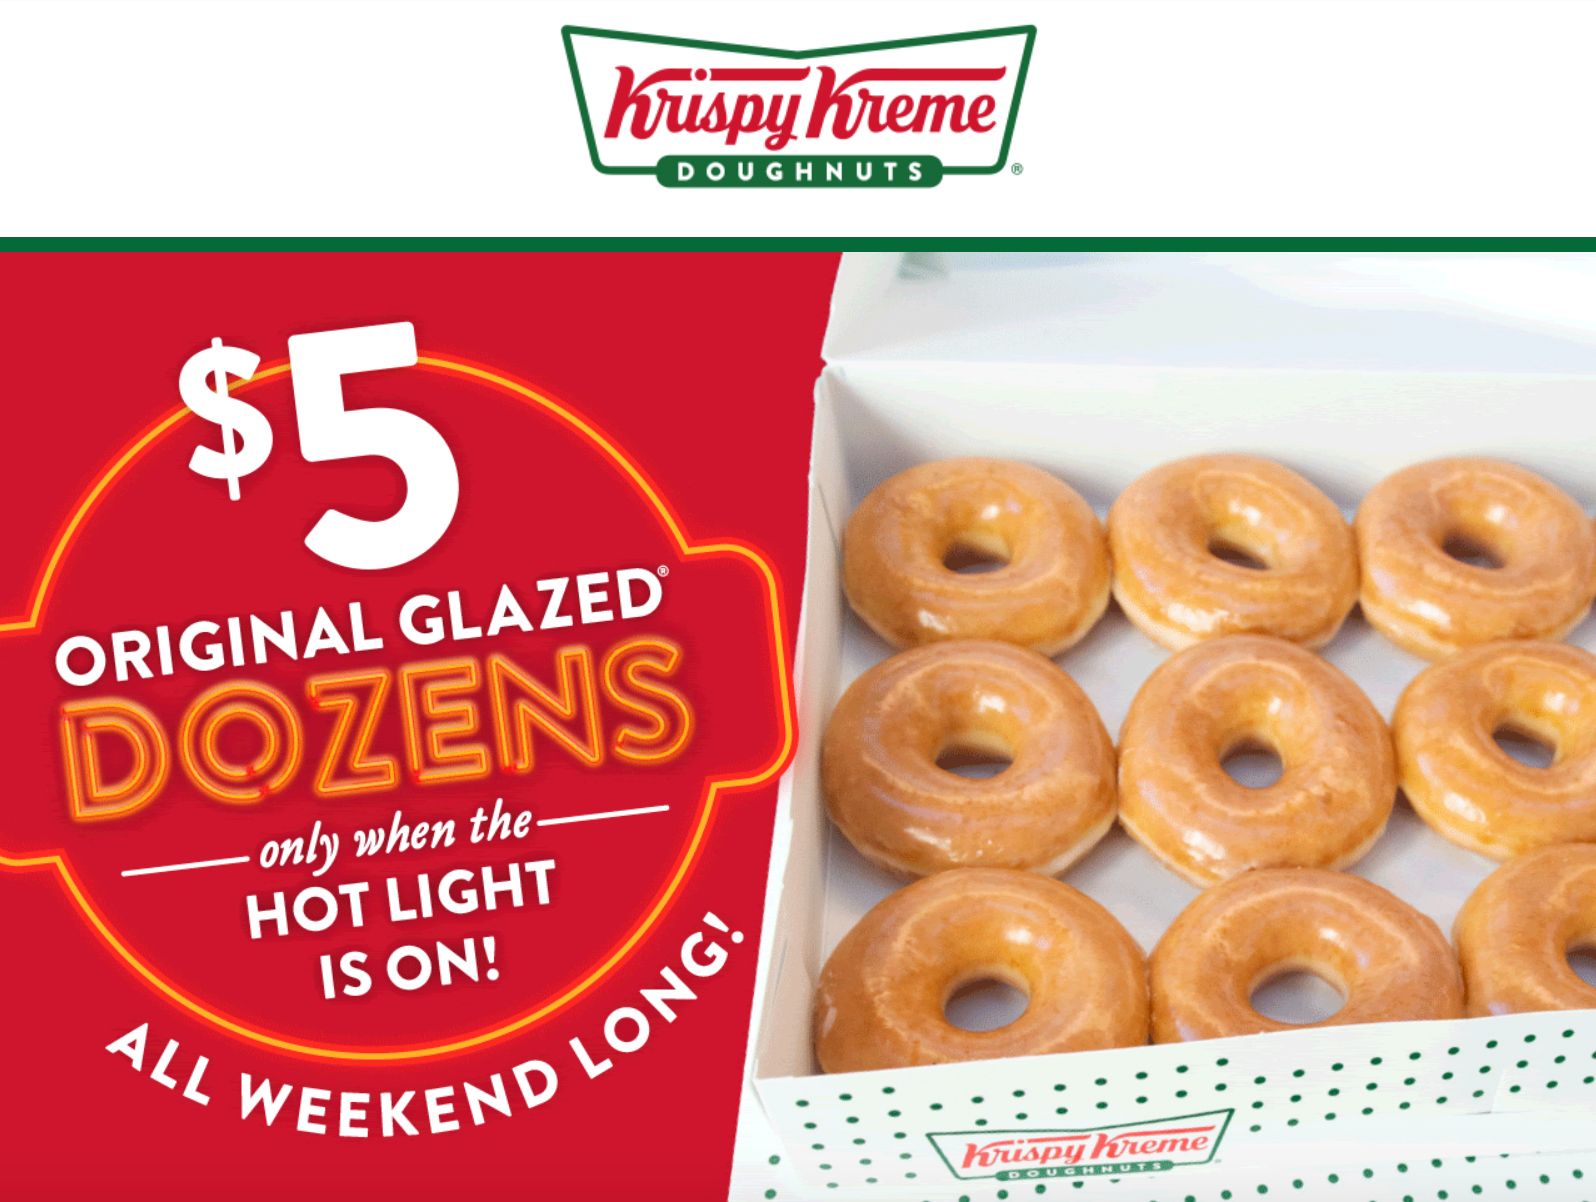 Save Big with $5 Original Glazed Dozens During Hot Light Hours Only at Krispy Kreme Through to February 28